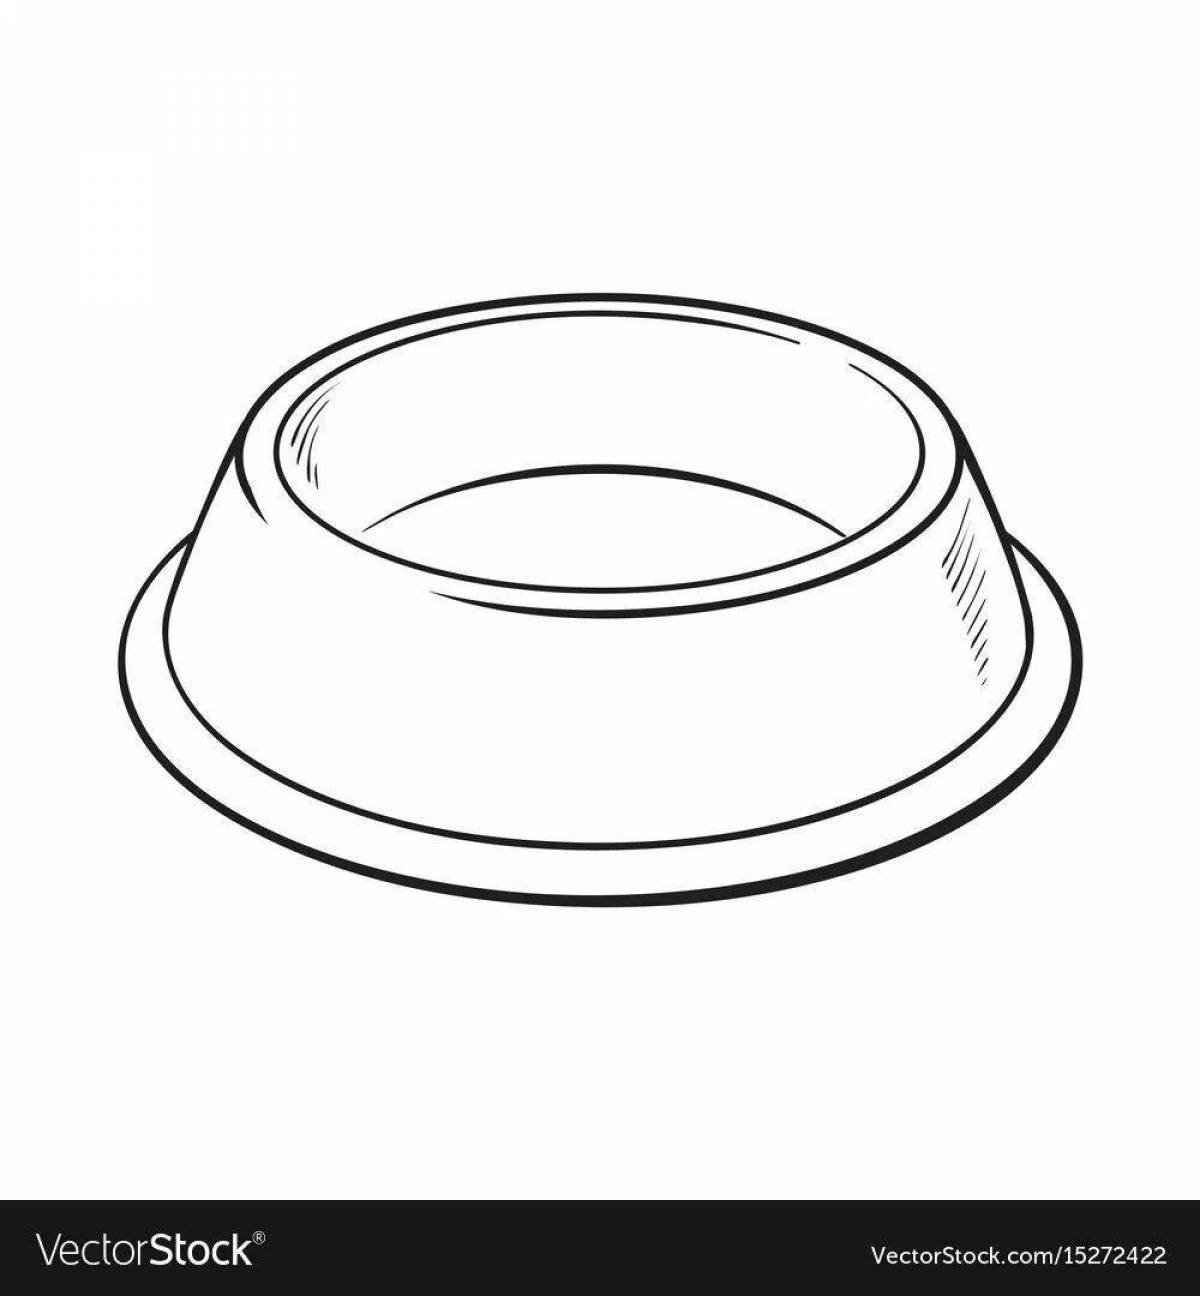 Animated dog bowl coloring page